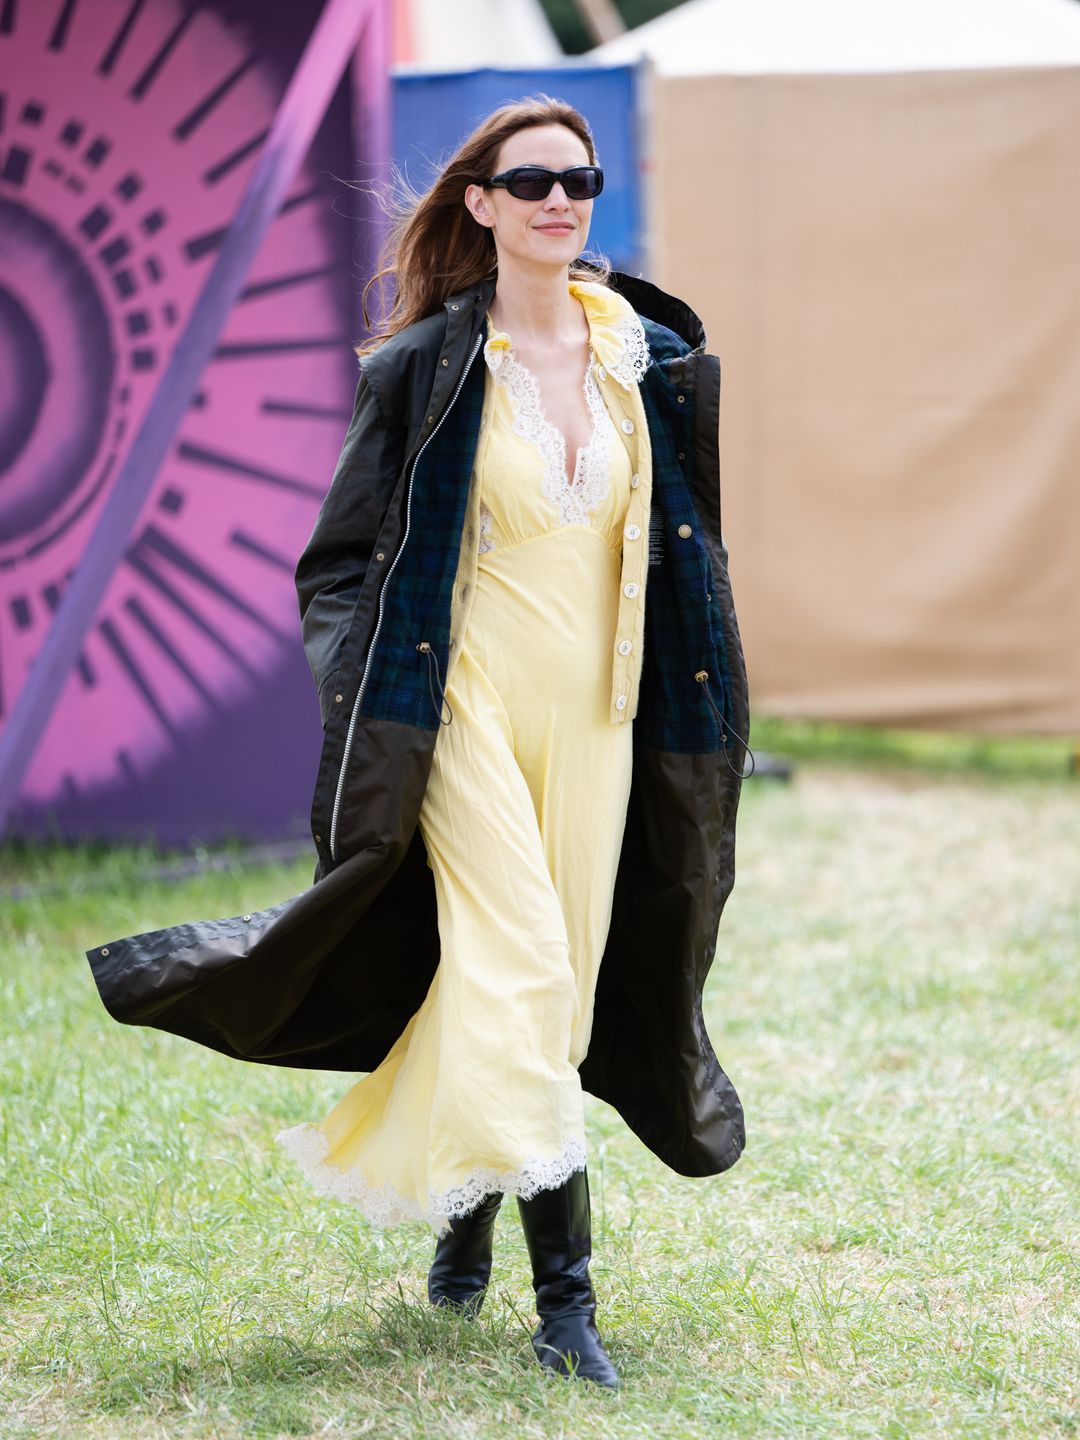 Alexa Chung on day three of Glastonbury in a yellow slip dress and jacket from her Barbour collaboration.